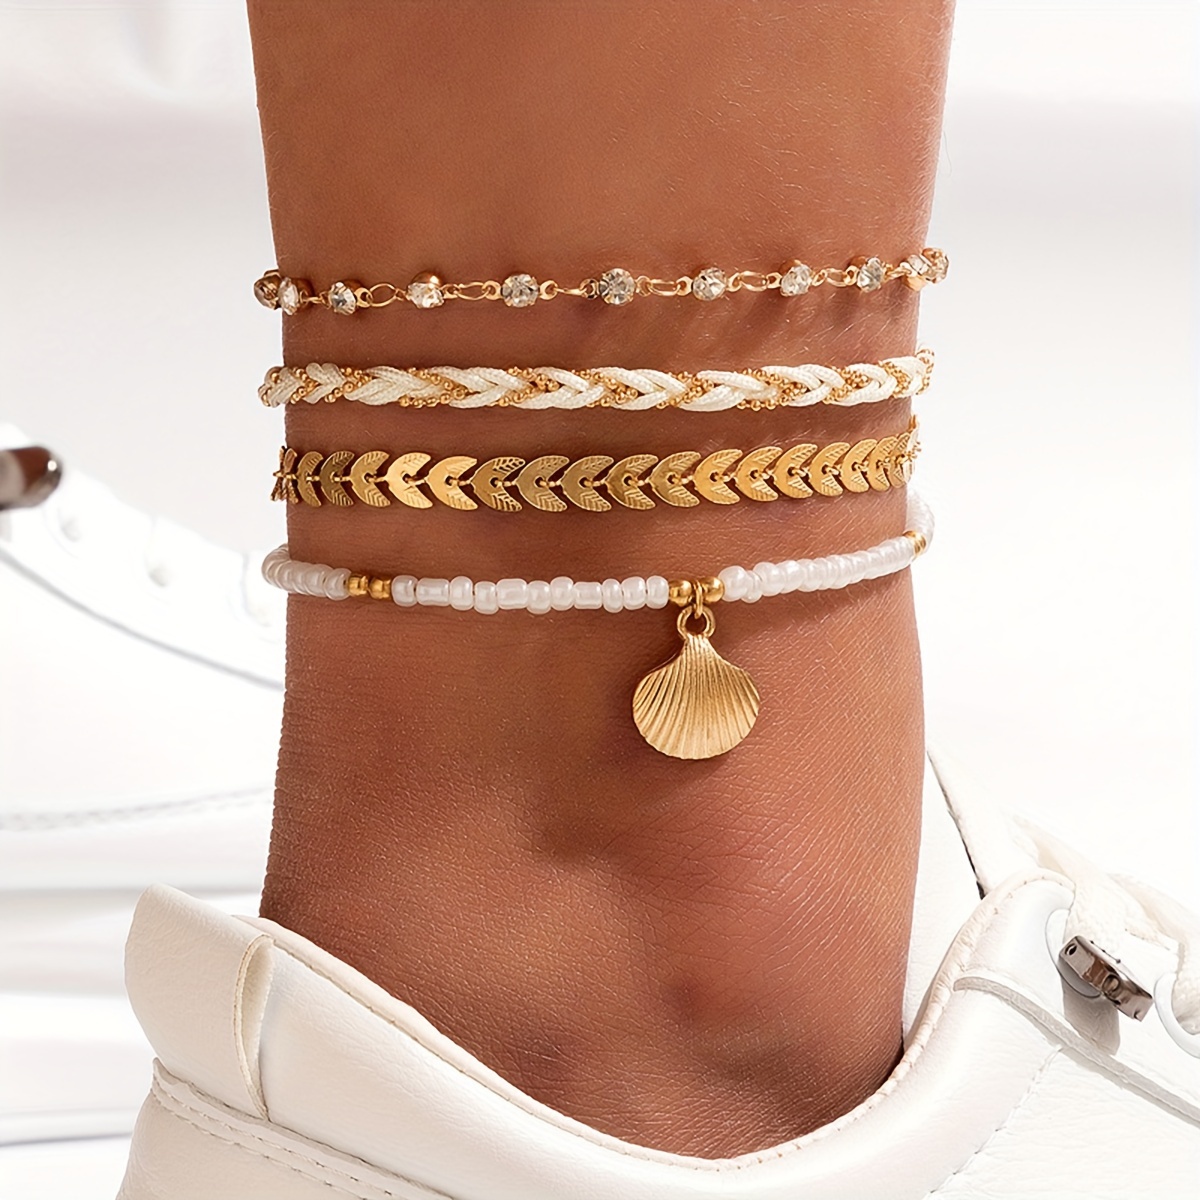 

4 Pcs/set Of Delicate Golden Shell Pendant Anklet With Rice Beads Fish Bone Chain Design Iron Jewelry Bohemian Vintage Style Summer Beach Foot Chain